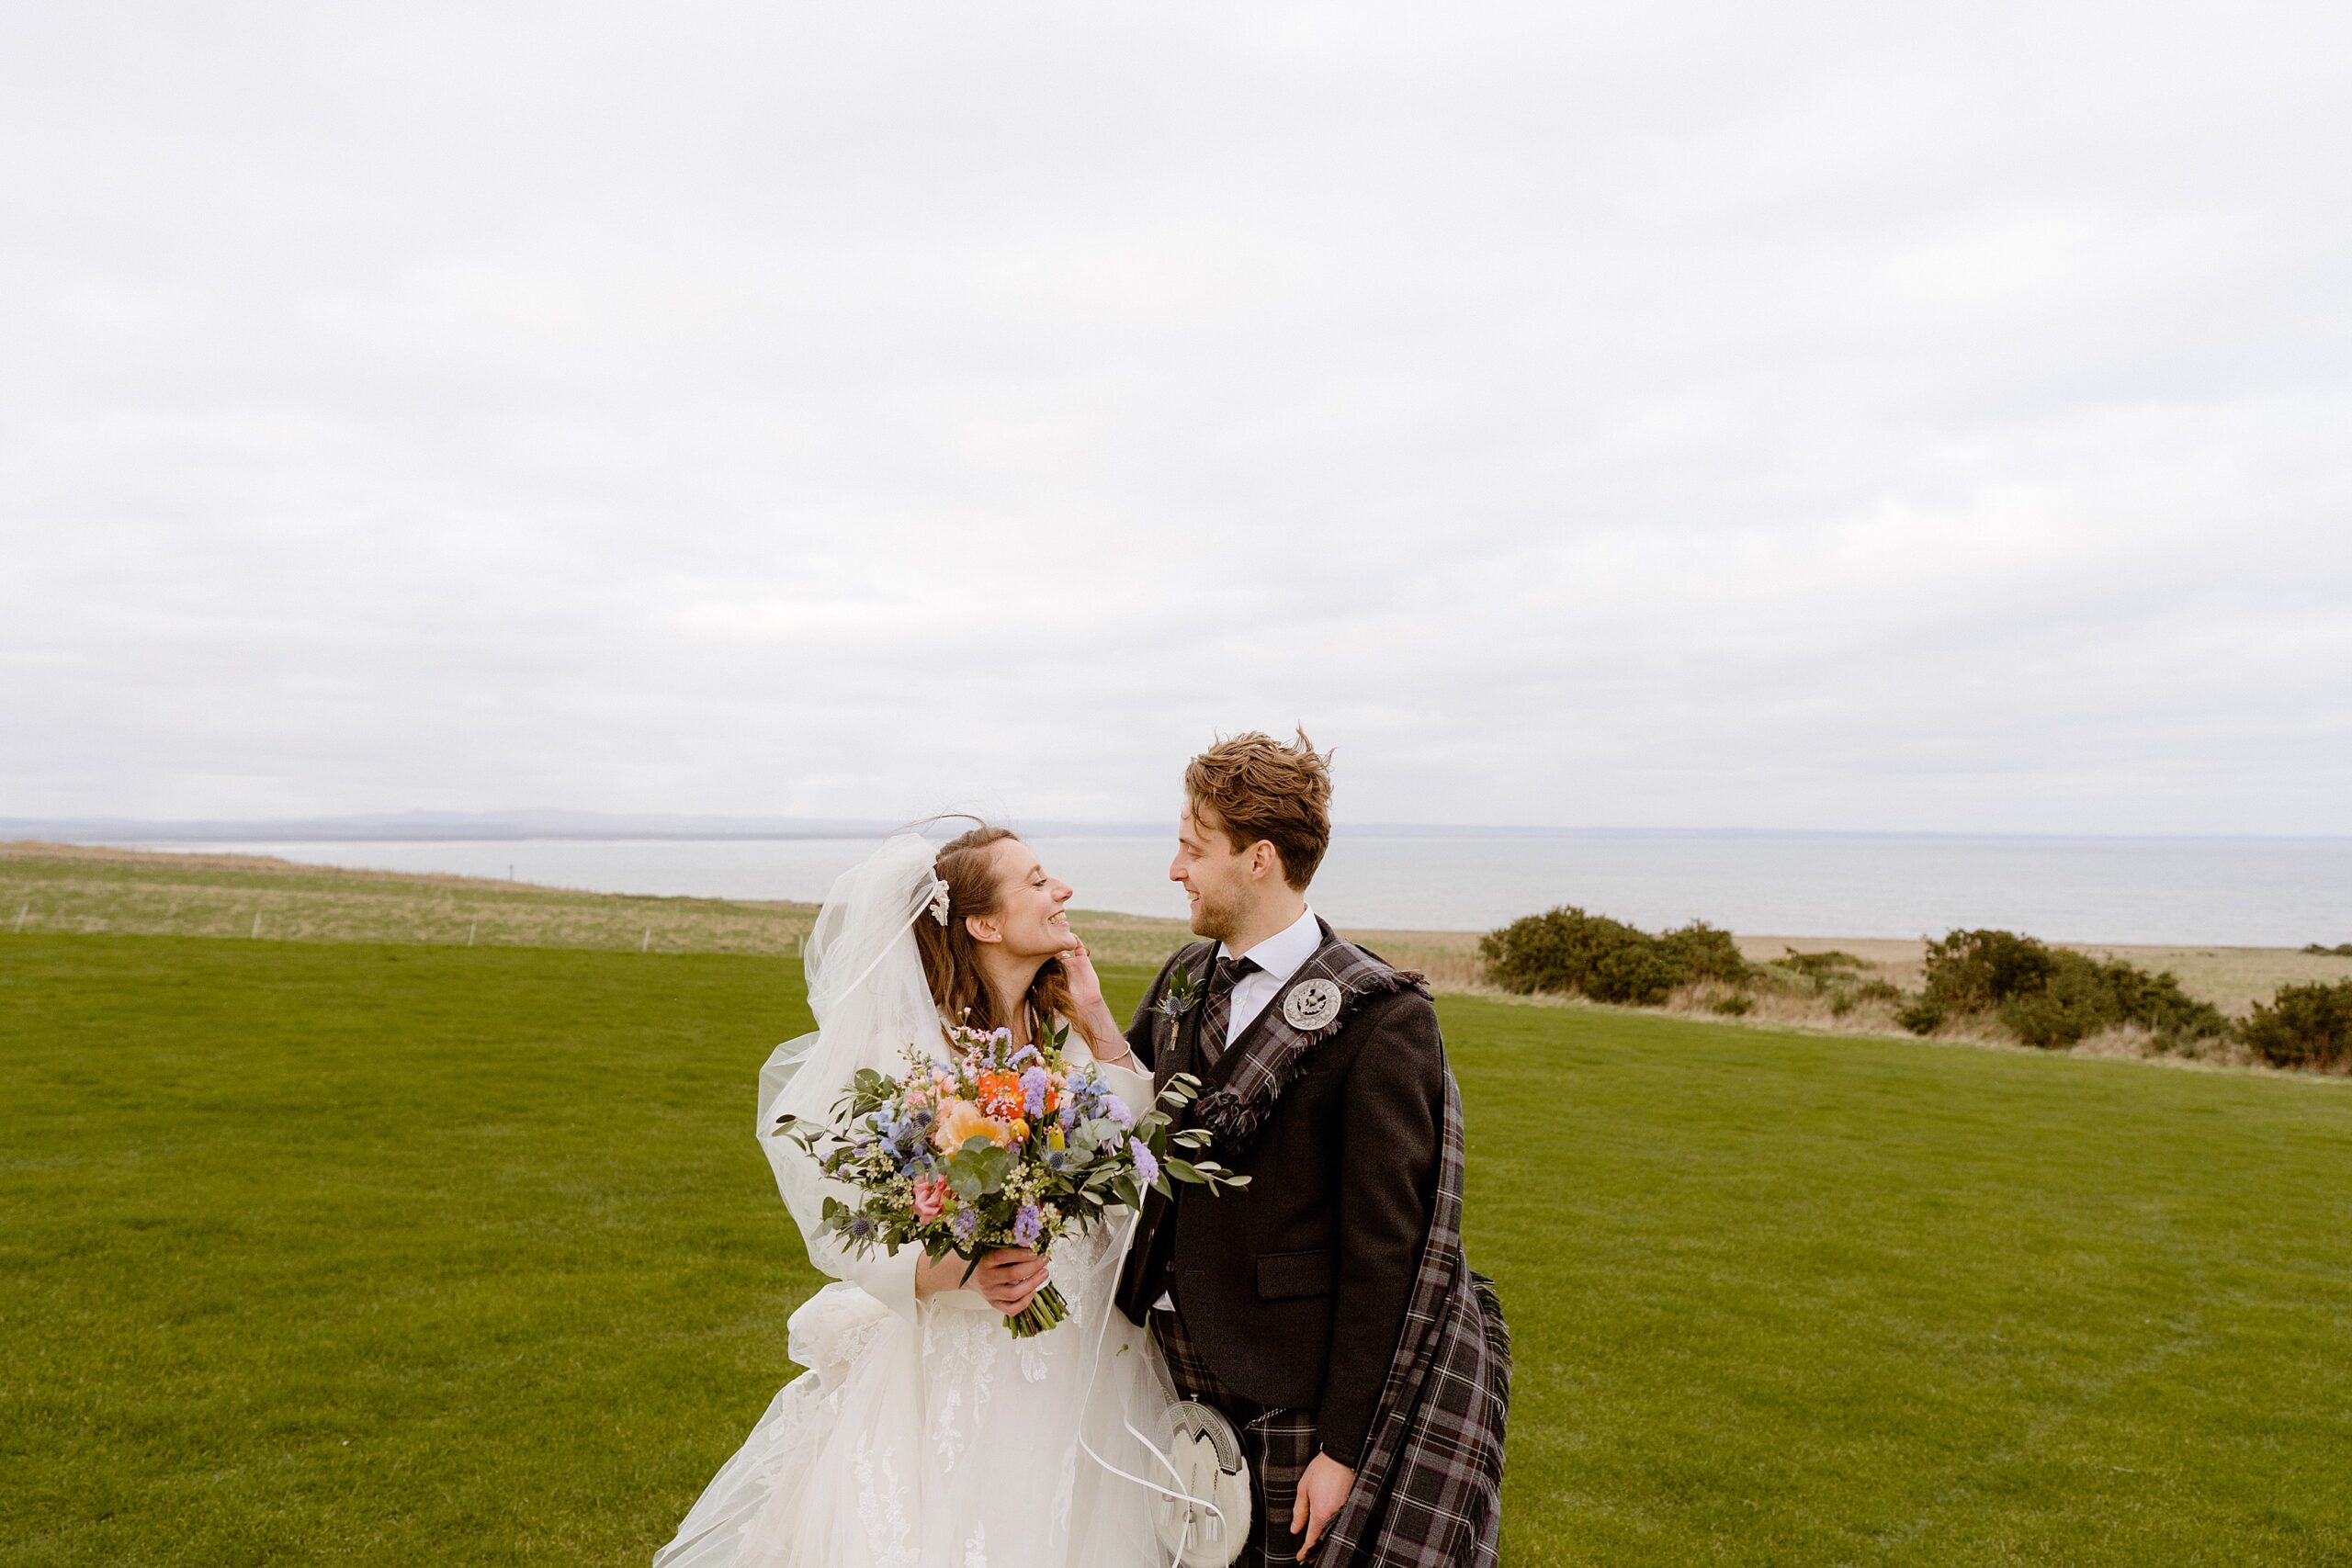 st andrews wedding photographer captures the bride and groom smiling and looking into each others eyes outside their barn wedding venue in scotland with the sea in the background